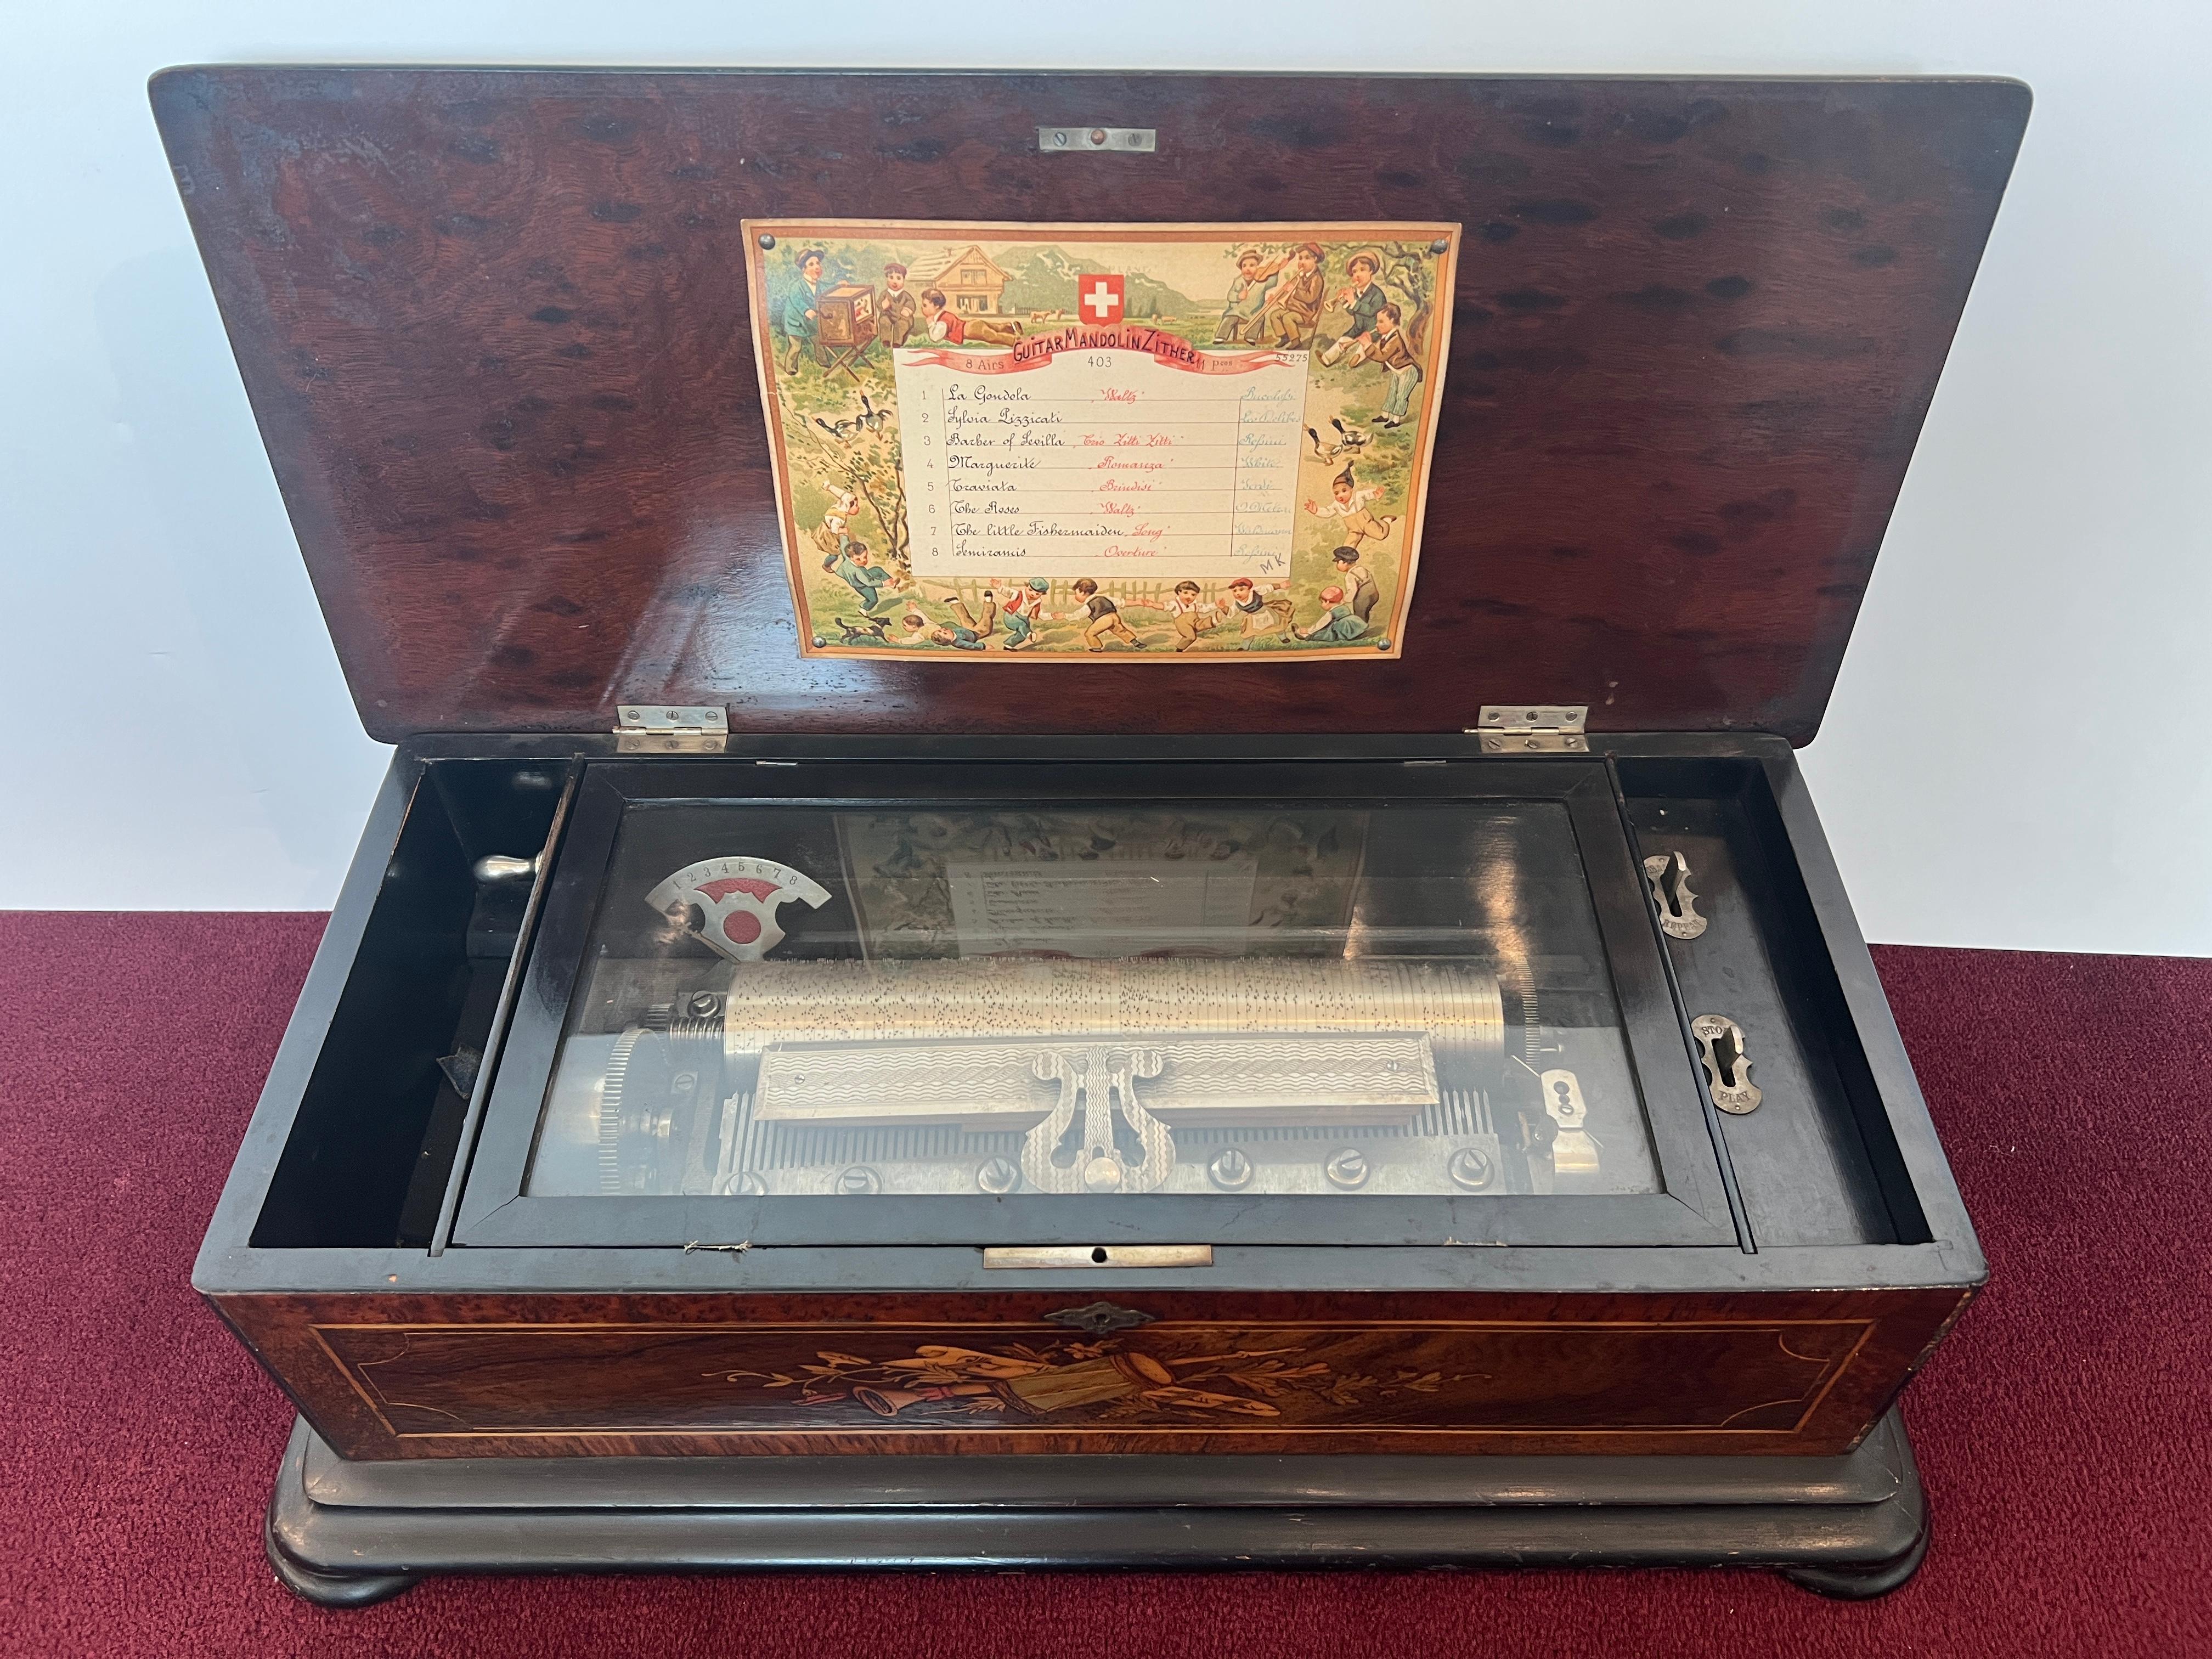 *PLEASE INQUIRE IF YOU HAVE QUESTIONS AND/OR IF YOU WOULD LIKE US TO SEND A VIDEO WITH THE MUSIC PLAYING.

Beautiful Antique Swiss Music Box, Inlaid with Guitar, Mandolin, and Zither
In Working Condition
Late 19th Century
Plays 8 Tunes
11